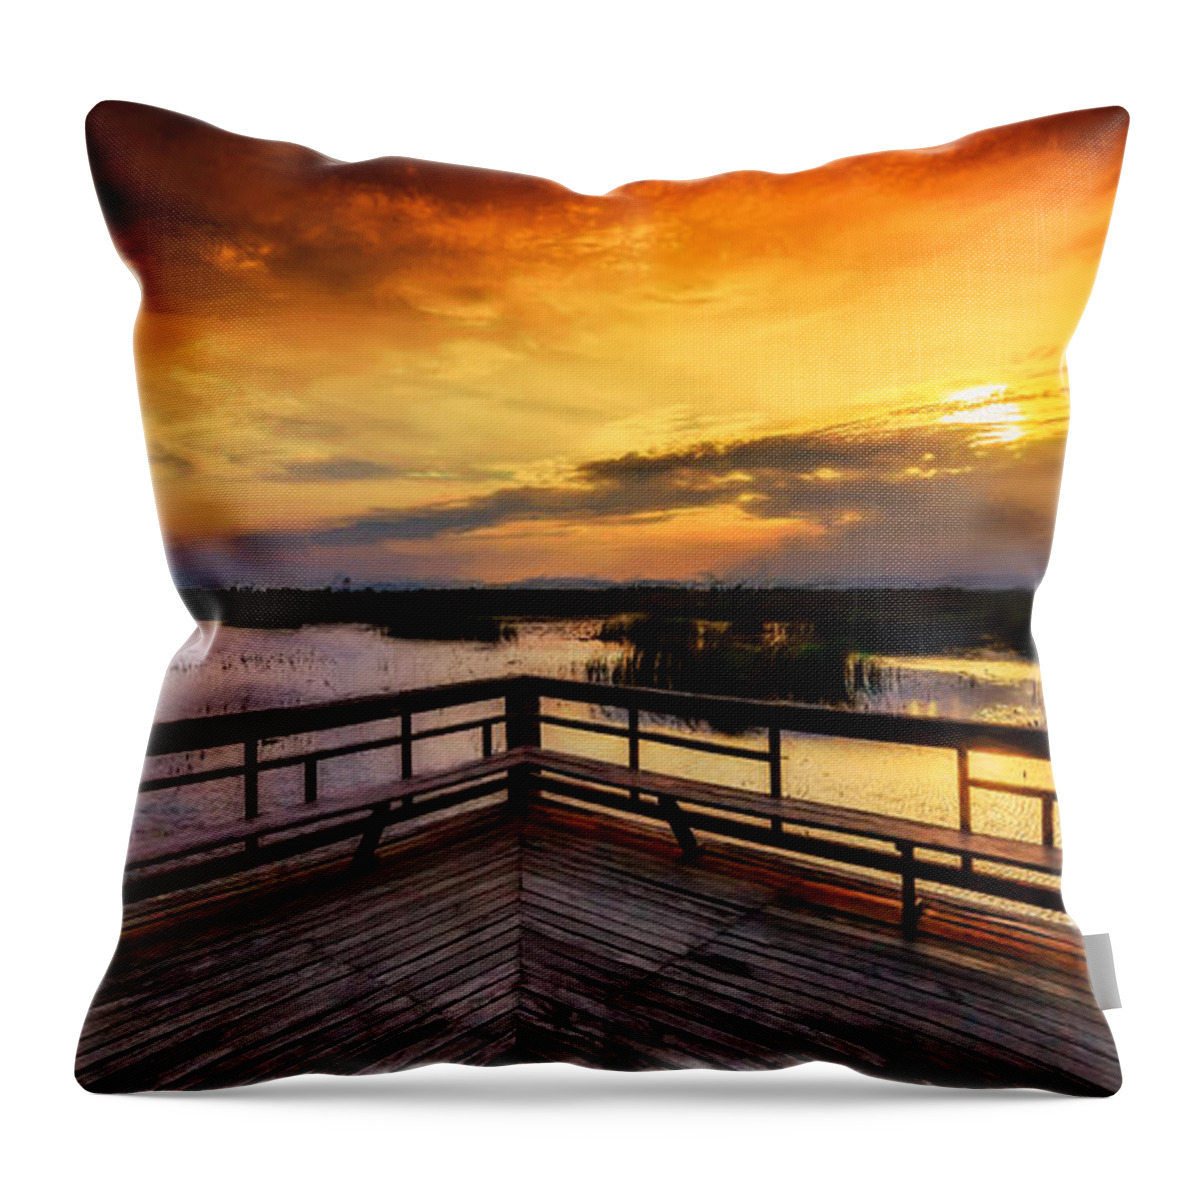 Khao Sam Roi Yot Throw Pillow featuring the photograph National Park Sunset by Adrian Evans